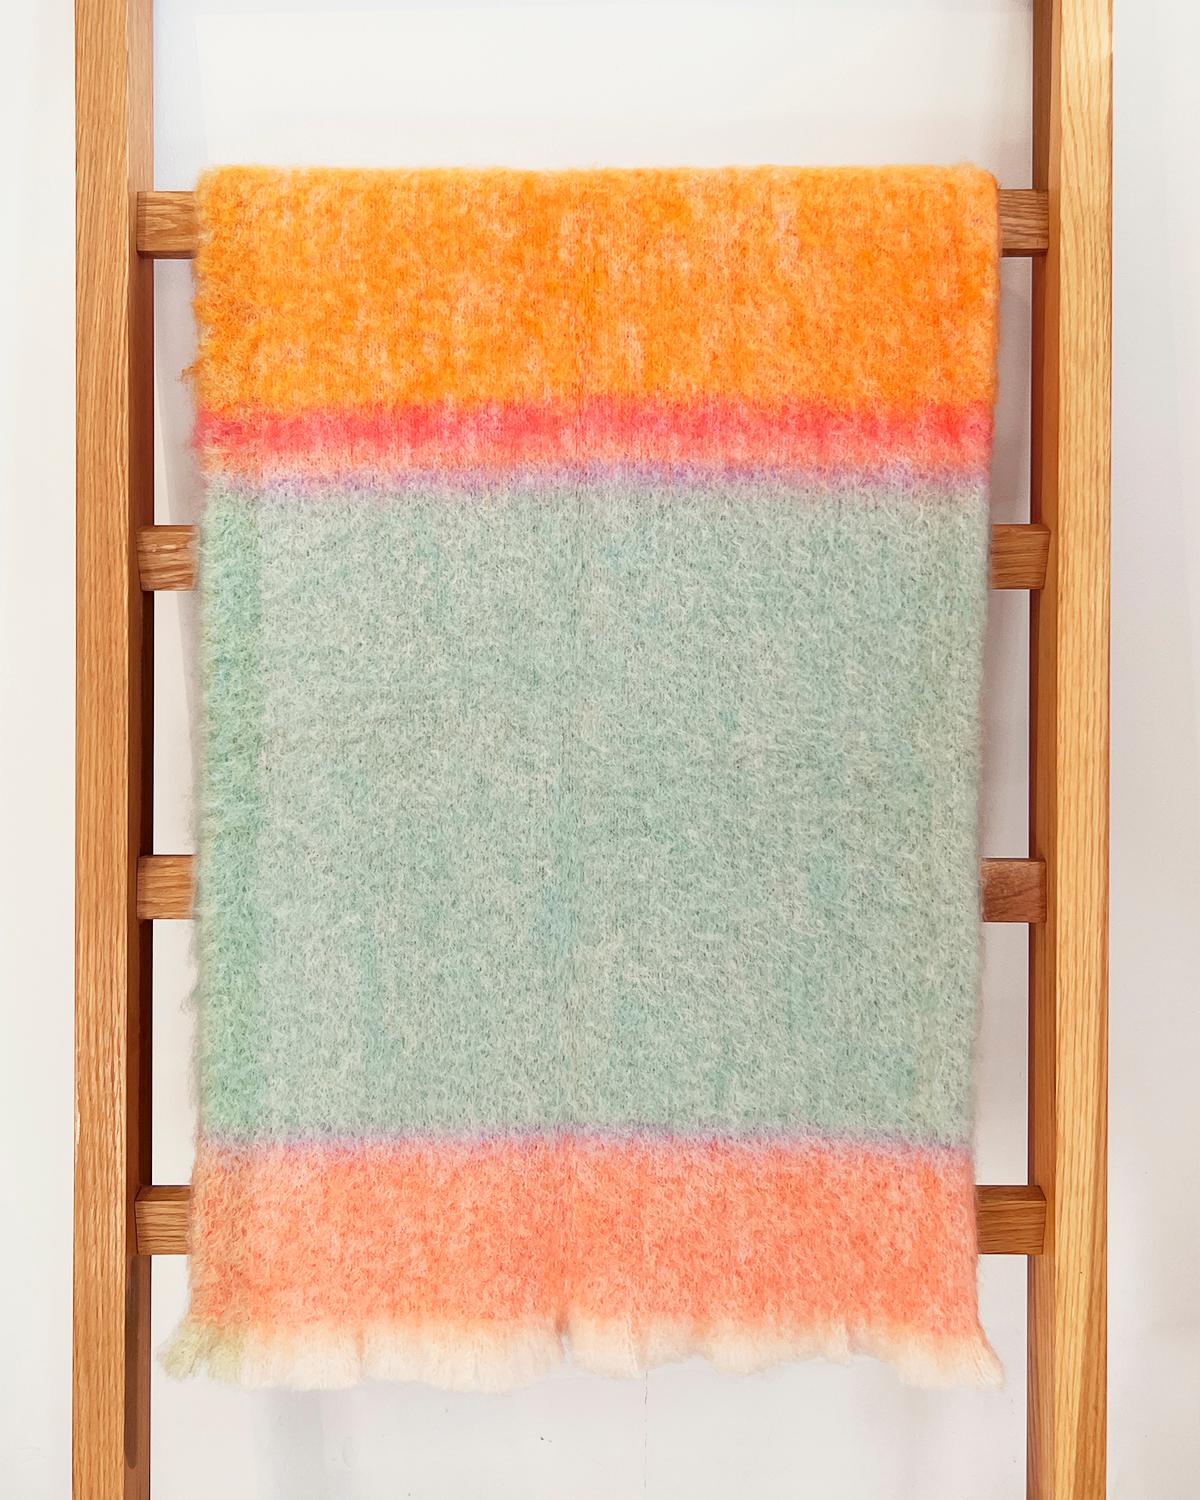 This handcrafted throw is an ideal addition to any interior. Made of luxurious mohair, it's ultra-soft and cozy, perfect for winter days. The bright colors—aqua, orange, pink, and lavender—will add a touch of maximalist flair to any living room or